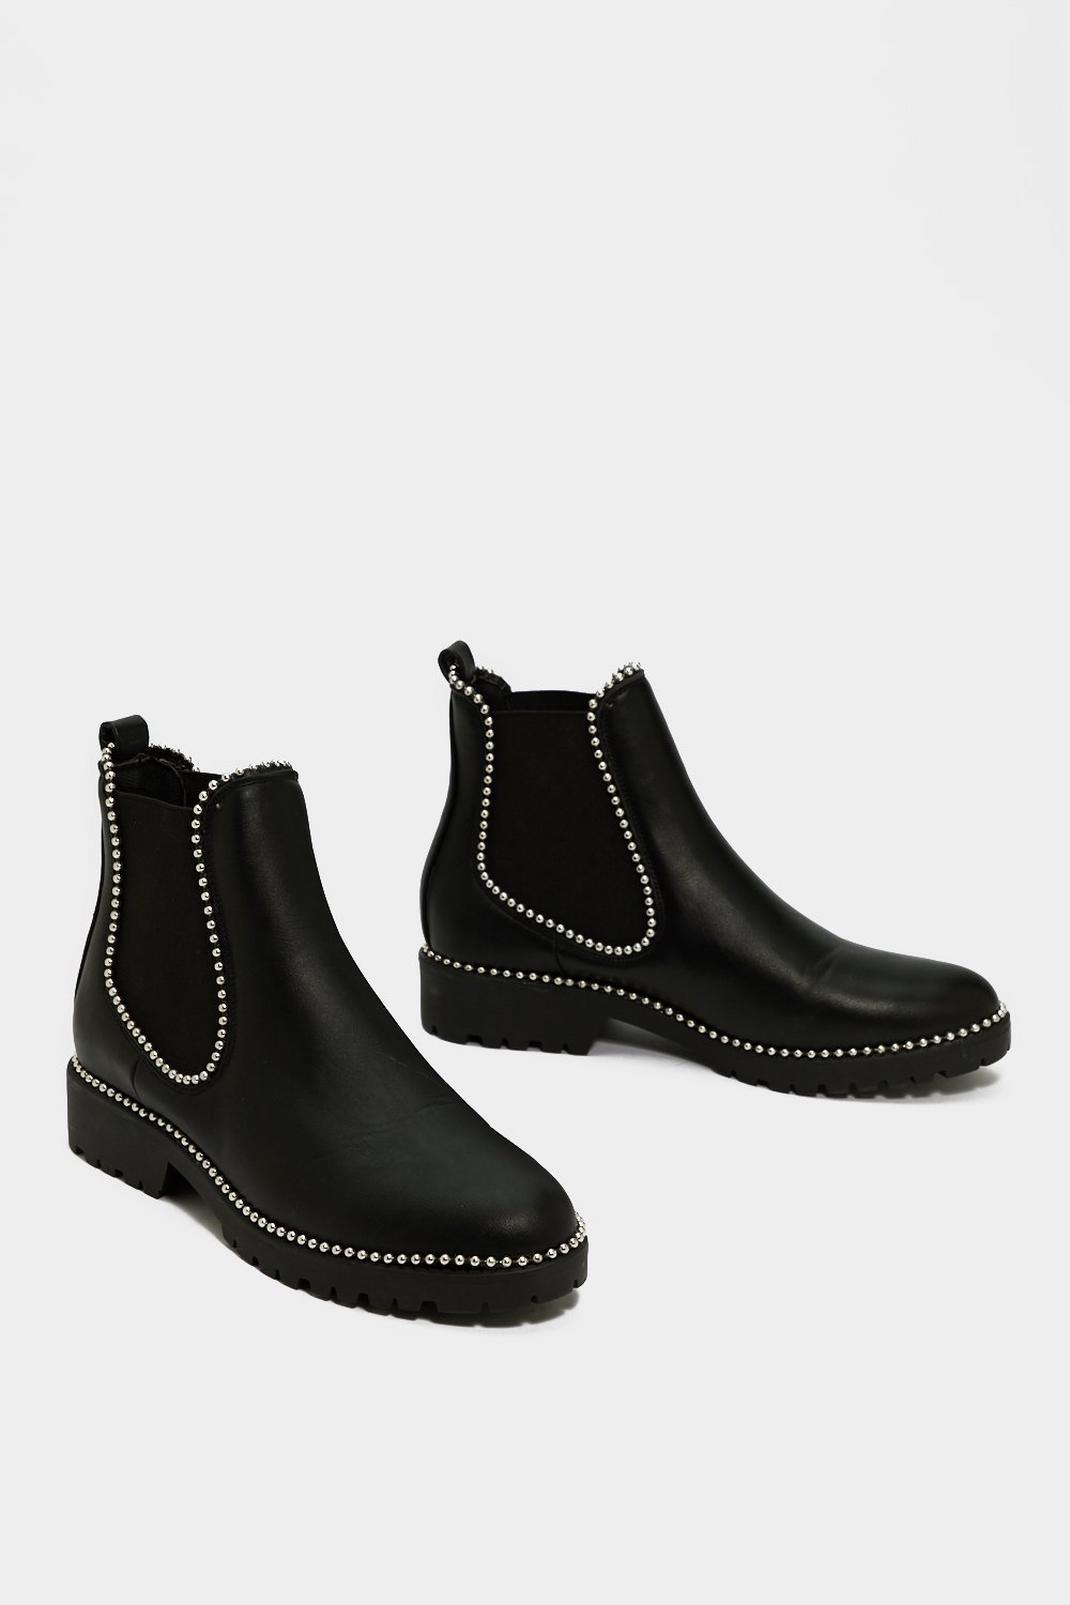 Black Studded Faux Leather Flat Chelsea Boots image number 1